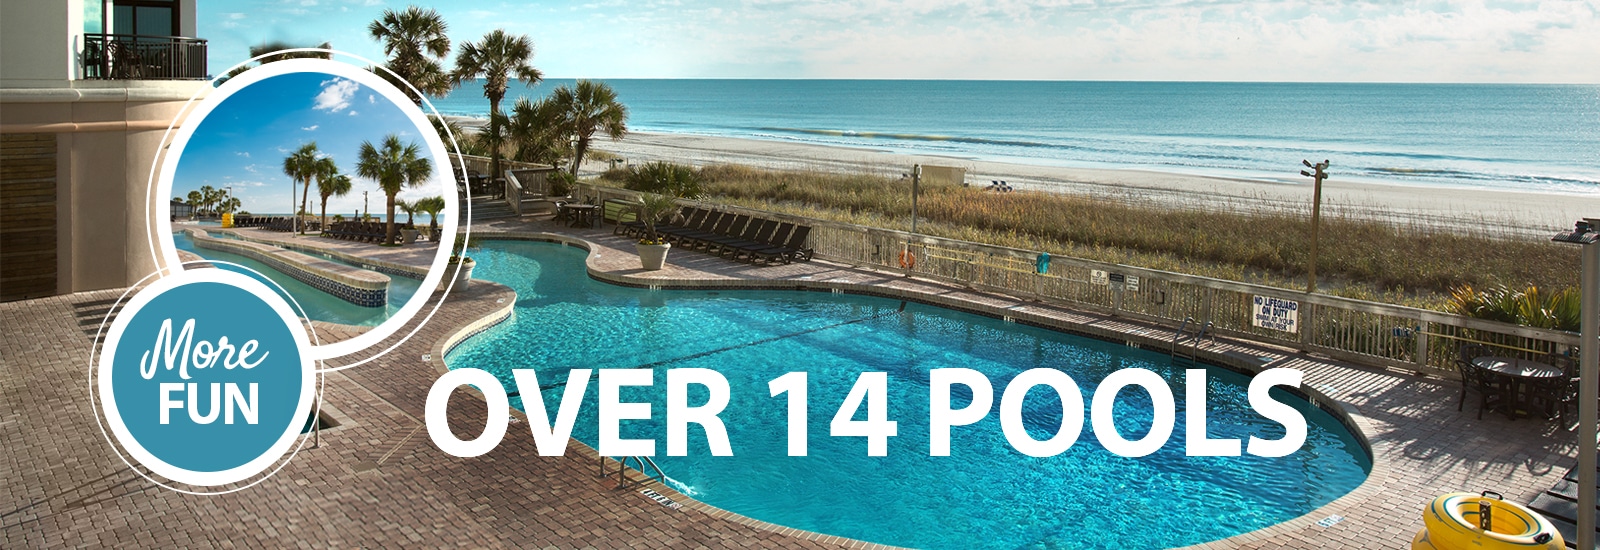 Amenities - Over 14 Pools for you to enjoy.